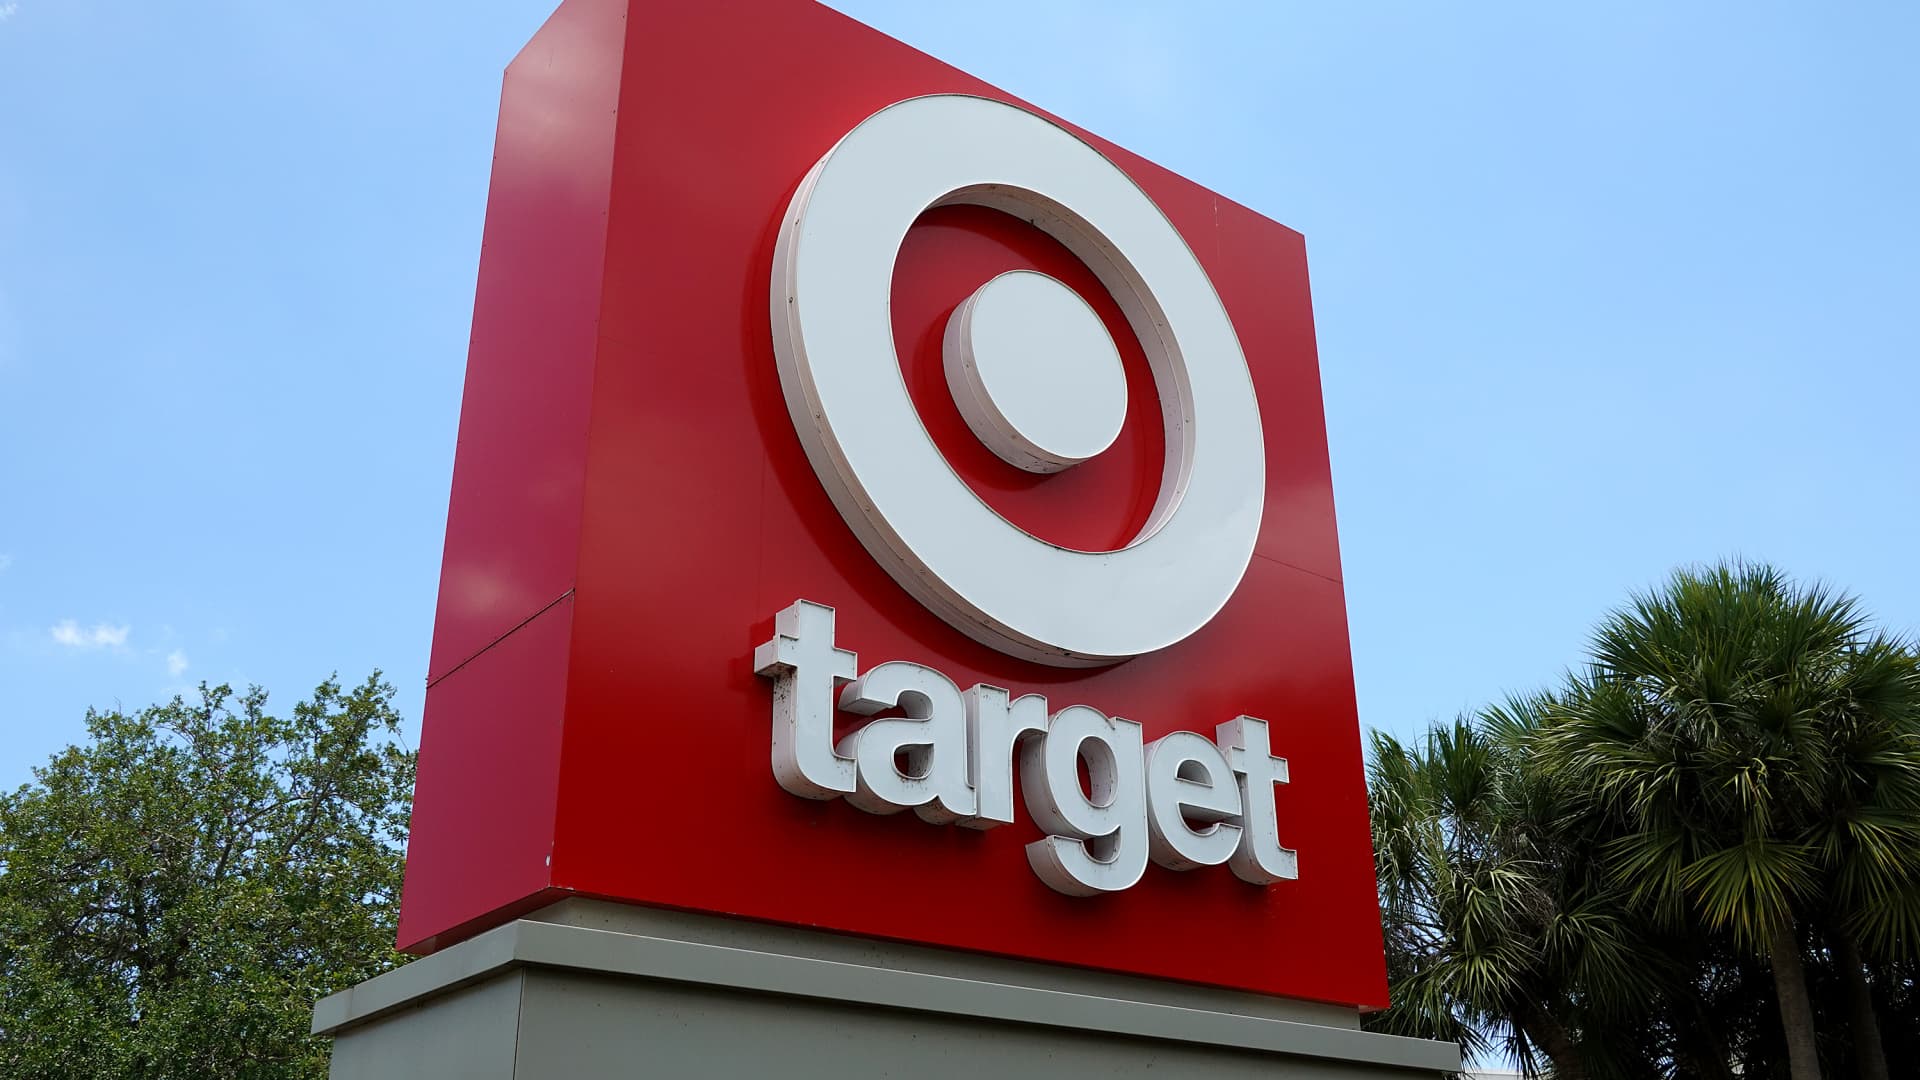 Target says it will close nine stores, citing violence and theft